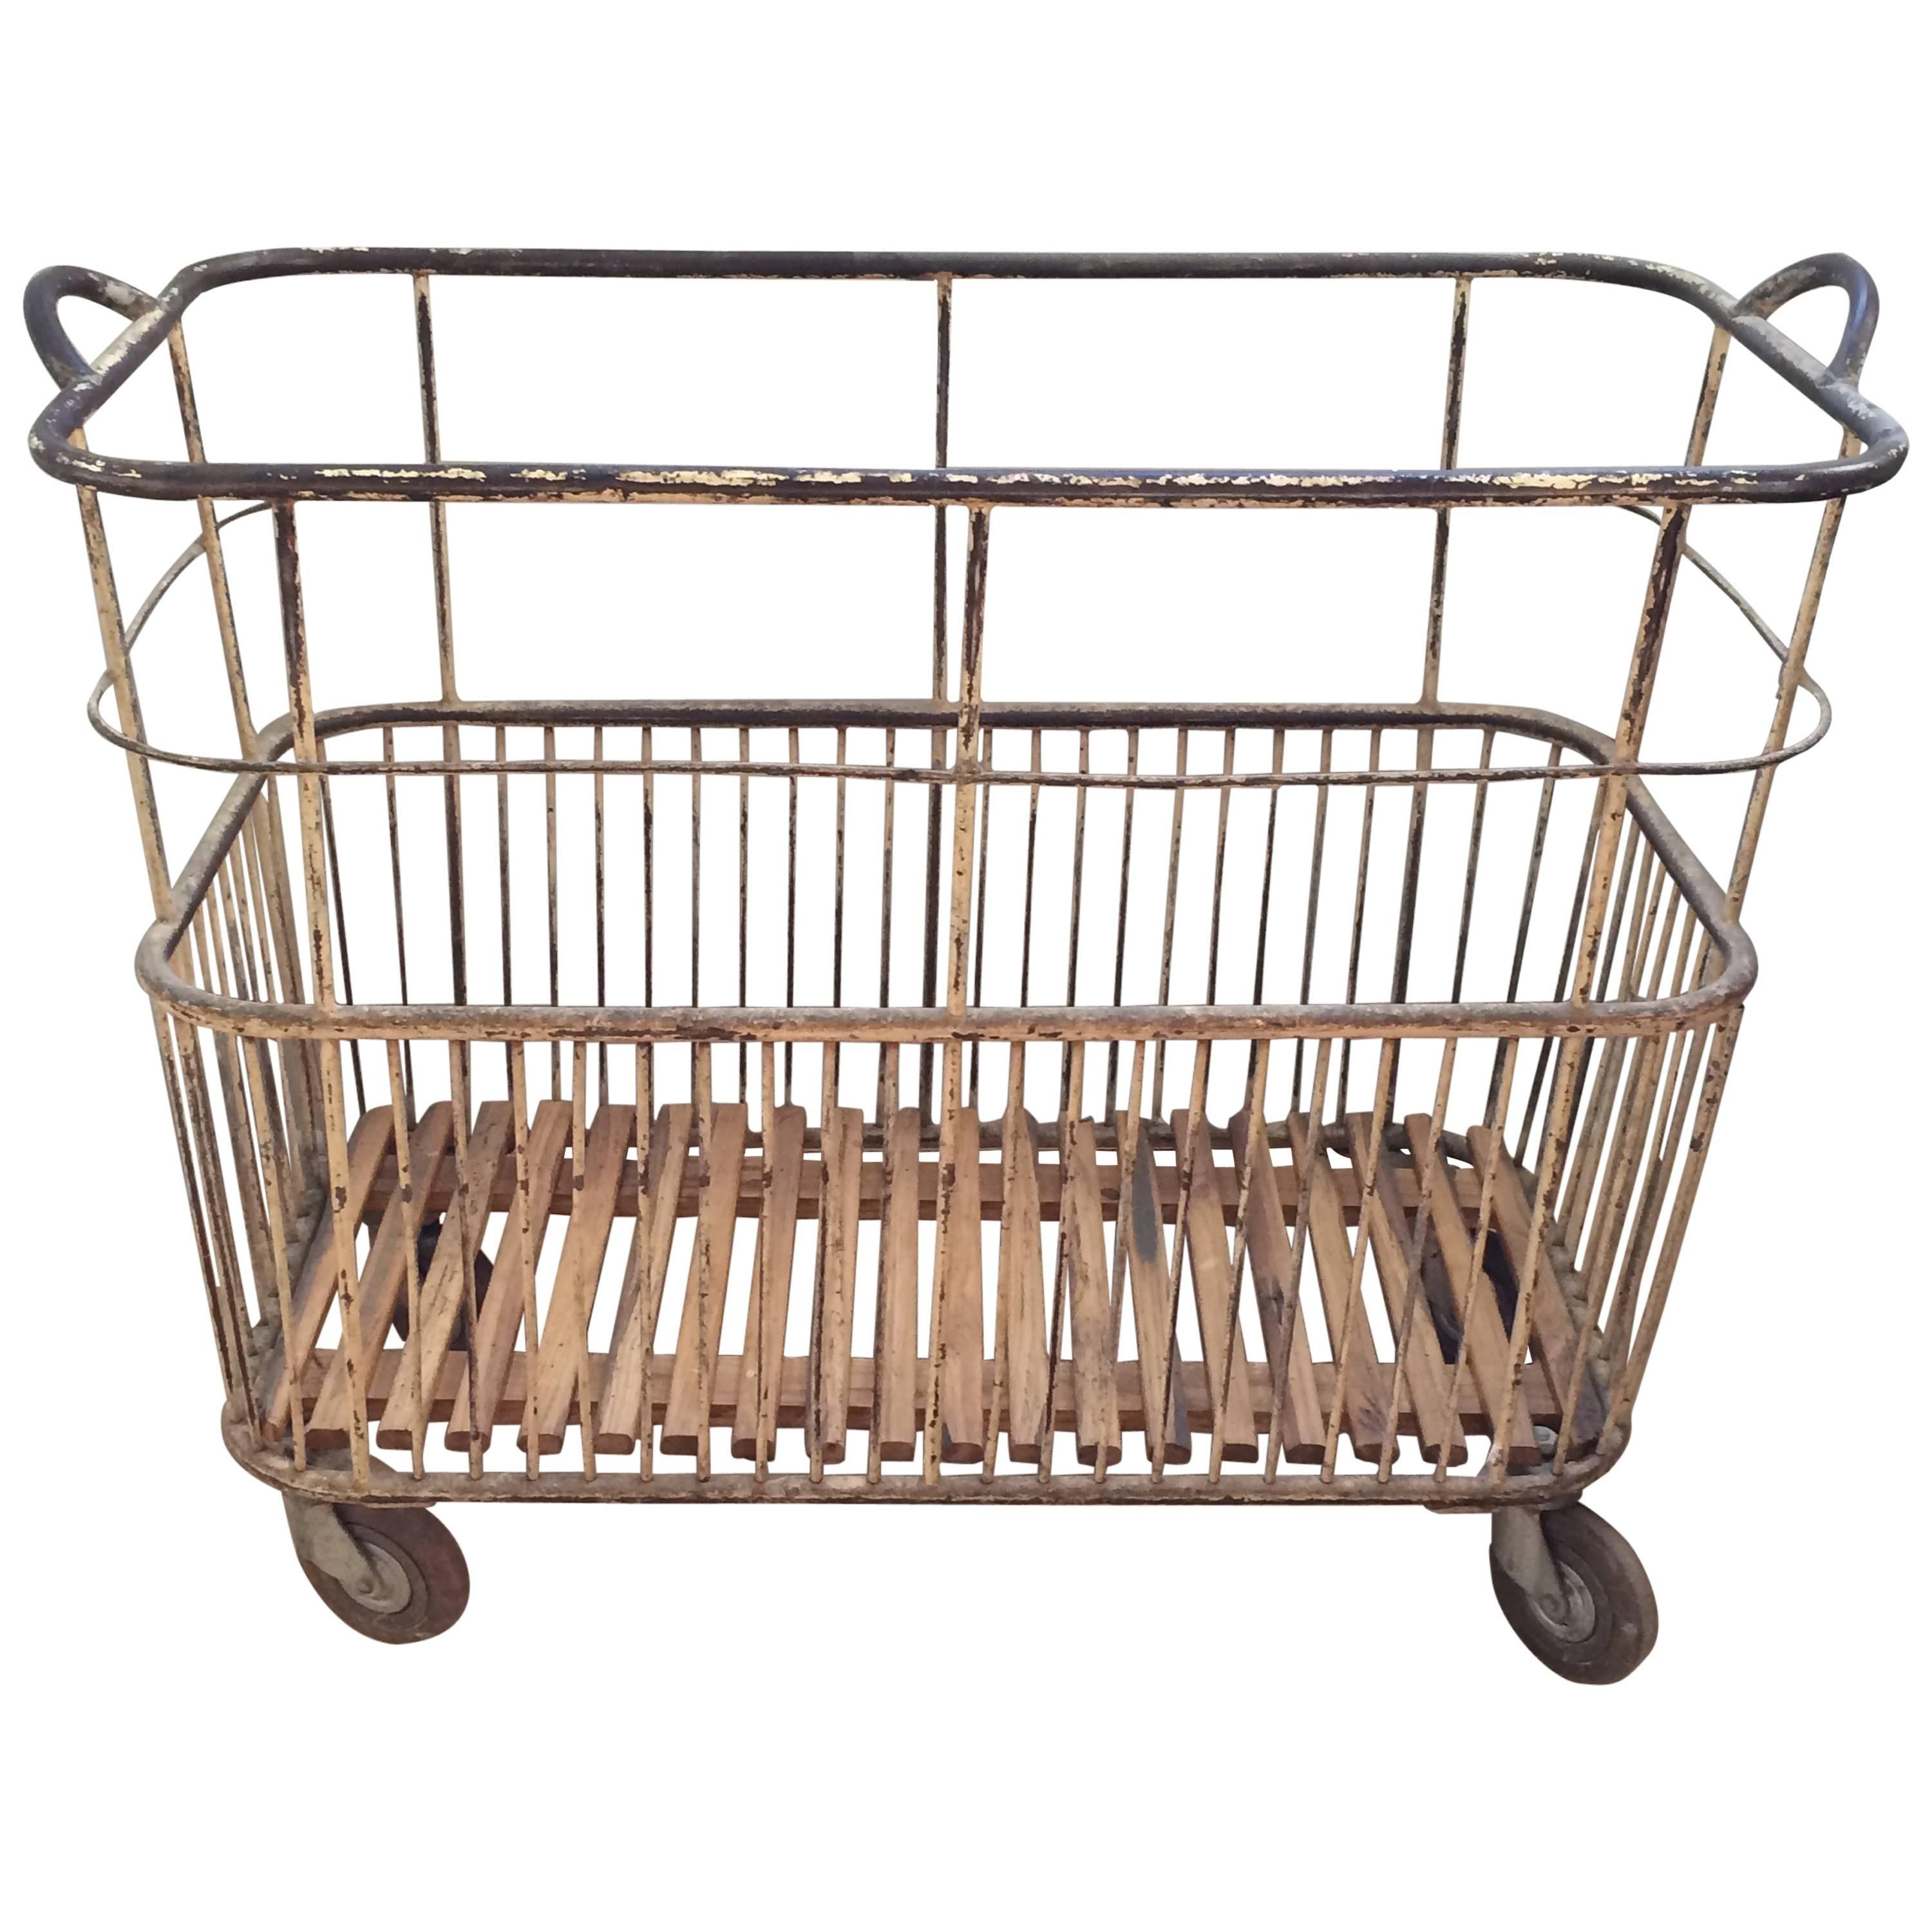 1930s French Baguette Trolley